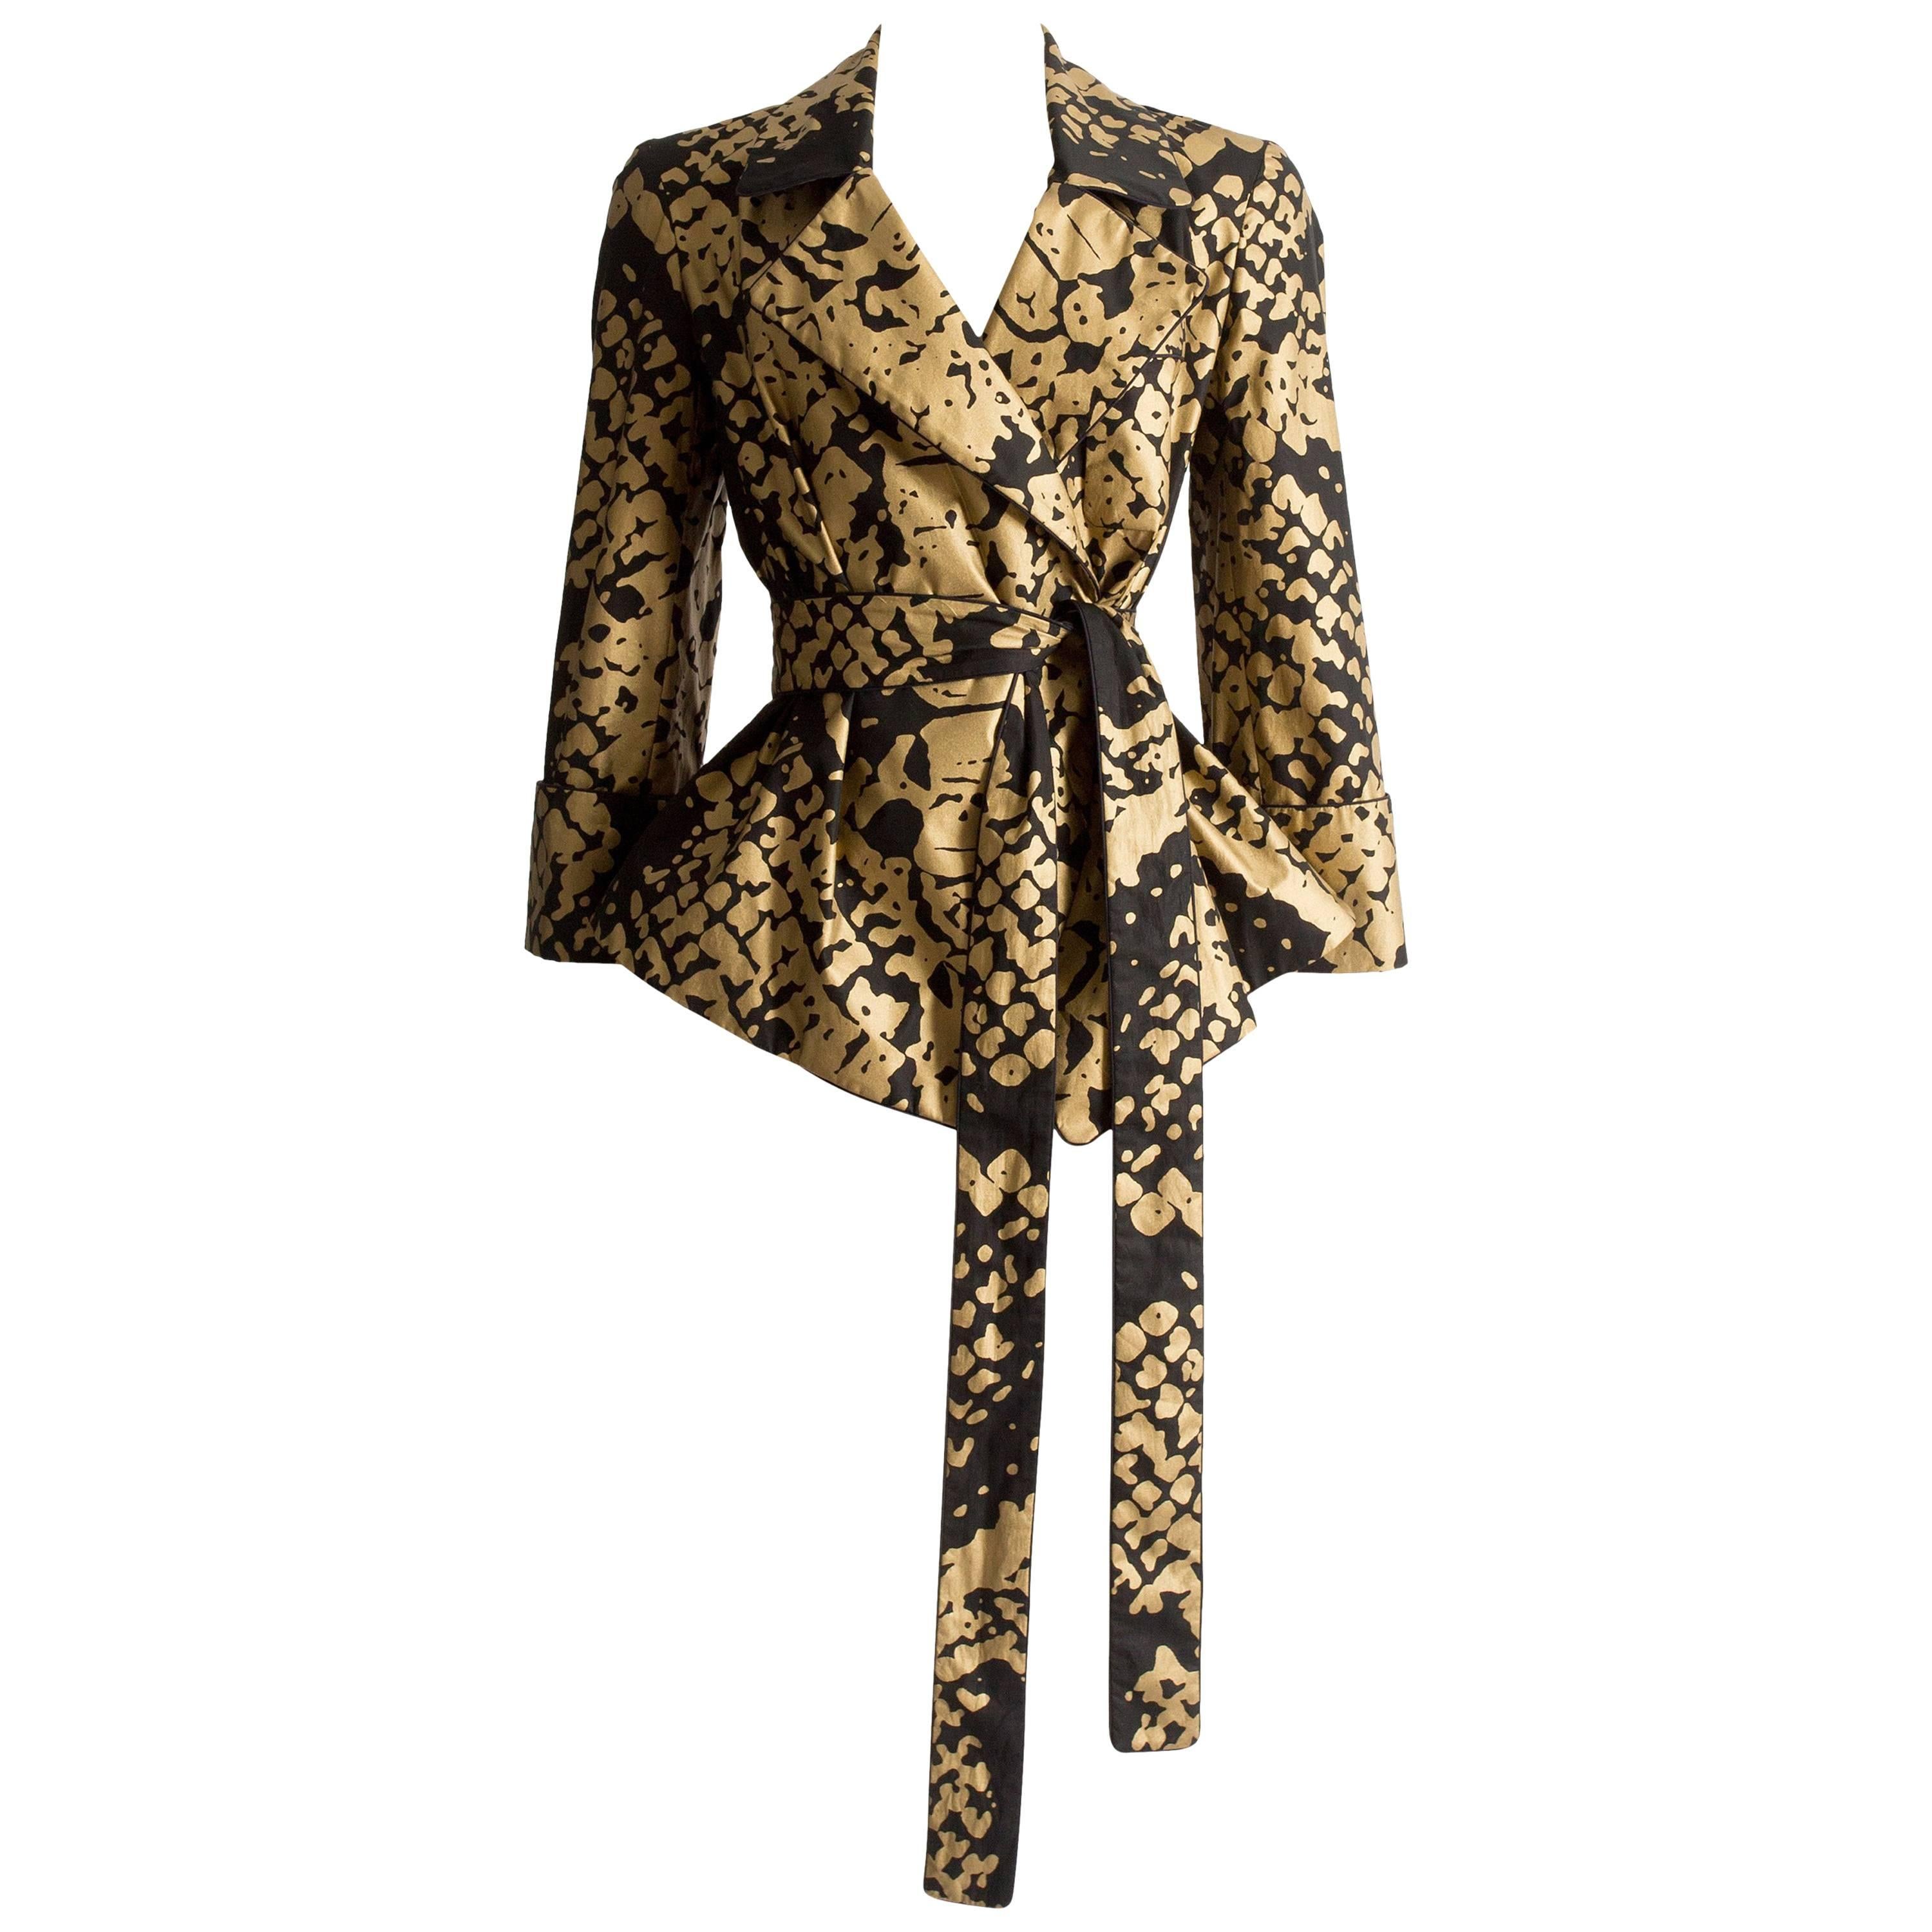 Yves Saint Laurent by Stefano Pilati black and gold evening jacket, circa 2008